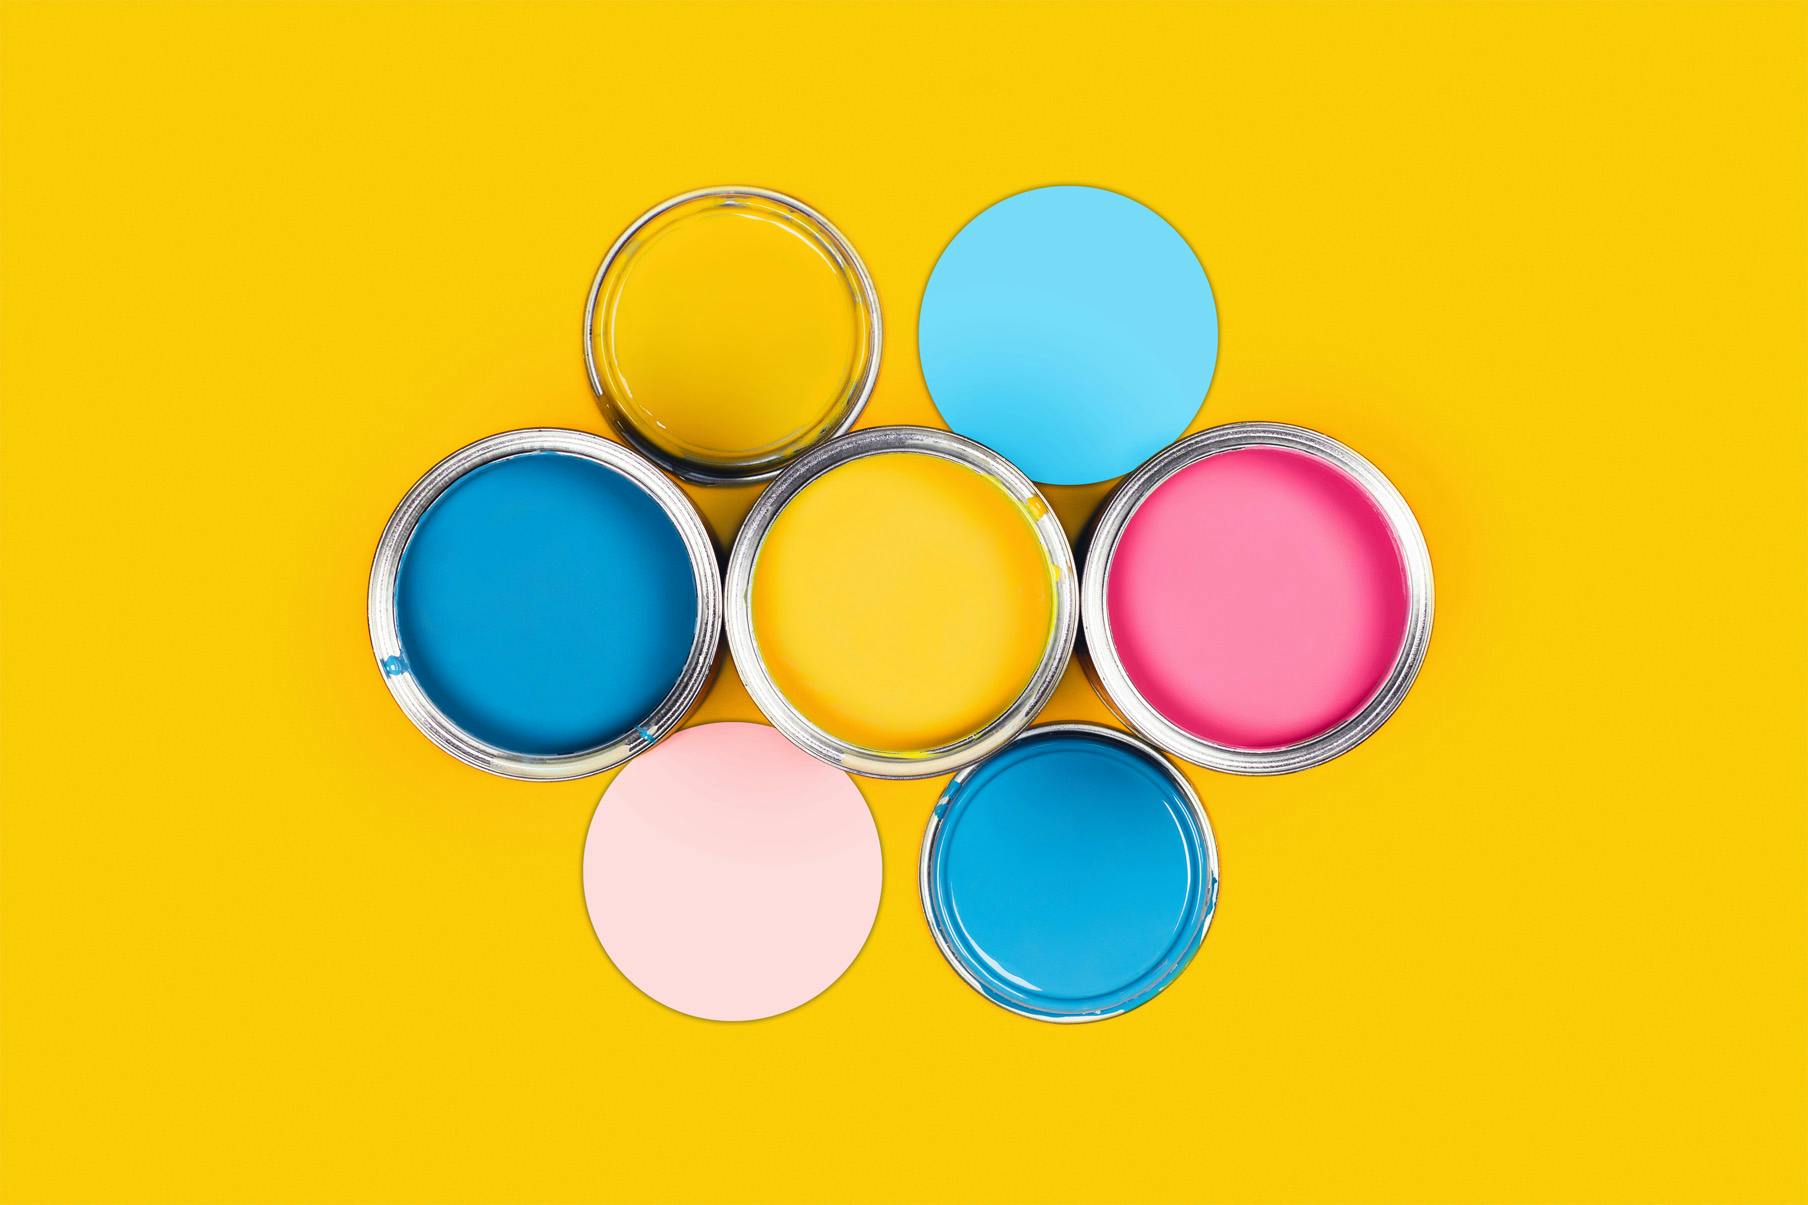 Multicoloured tins of paint arranged in hexagonal formation